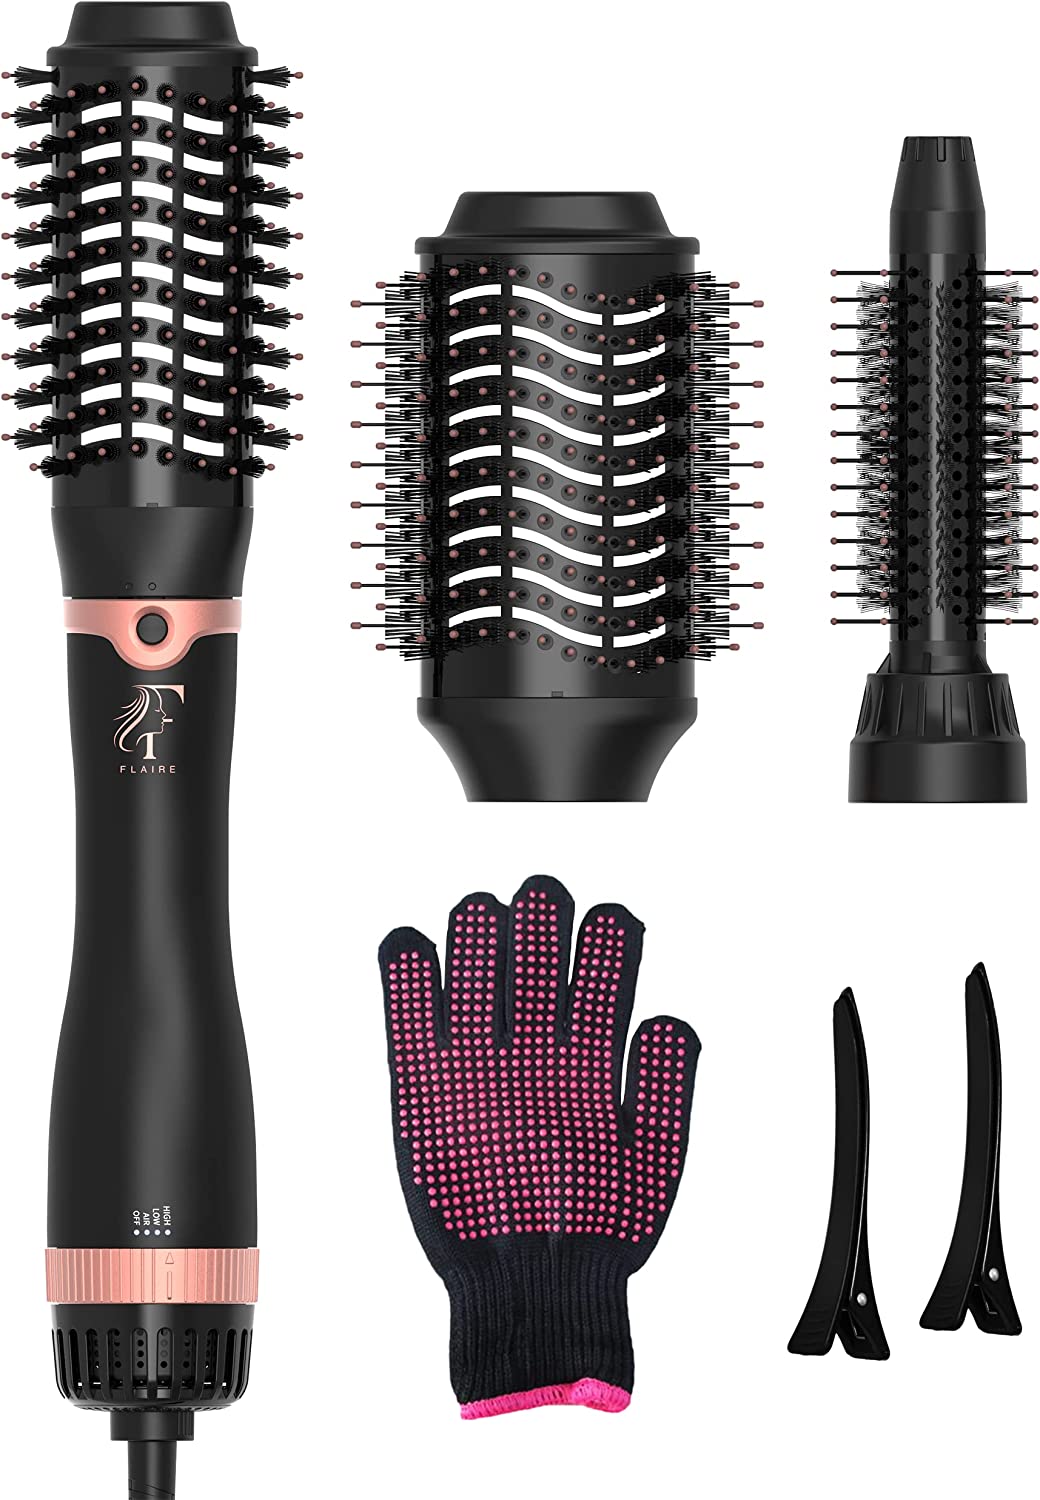 Flaire ROSÉ Set of 6 Volume Hair Dryer Brushes, Hot Air Brush for Long and Medium Short Hair, Hair Styling Round Brush Hair Dryer for Drying, Curling Hair Dryer with Ion Technology Including Accessories